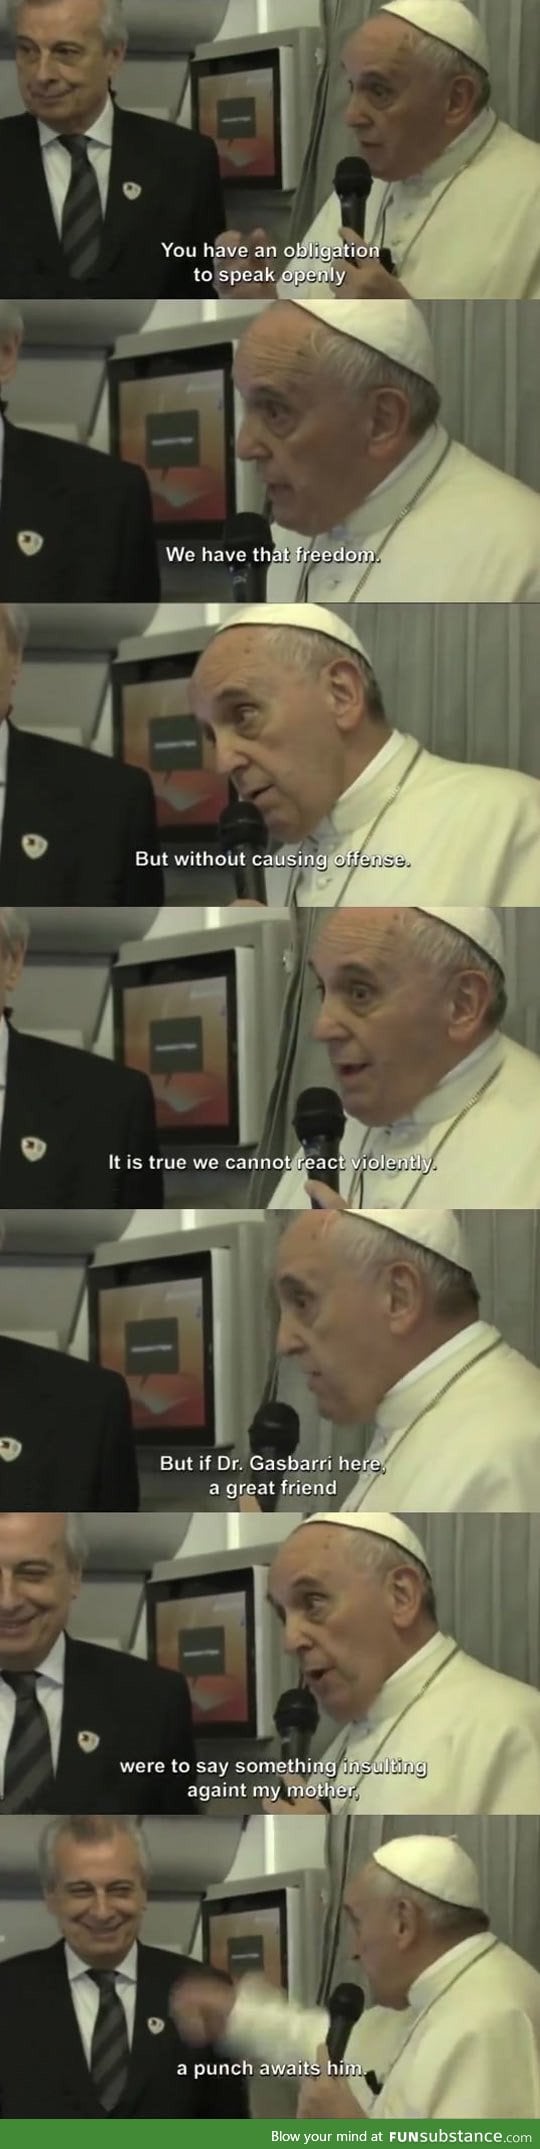 Pope Francis Doesn't Mess Around